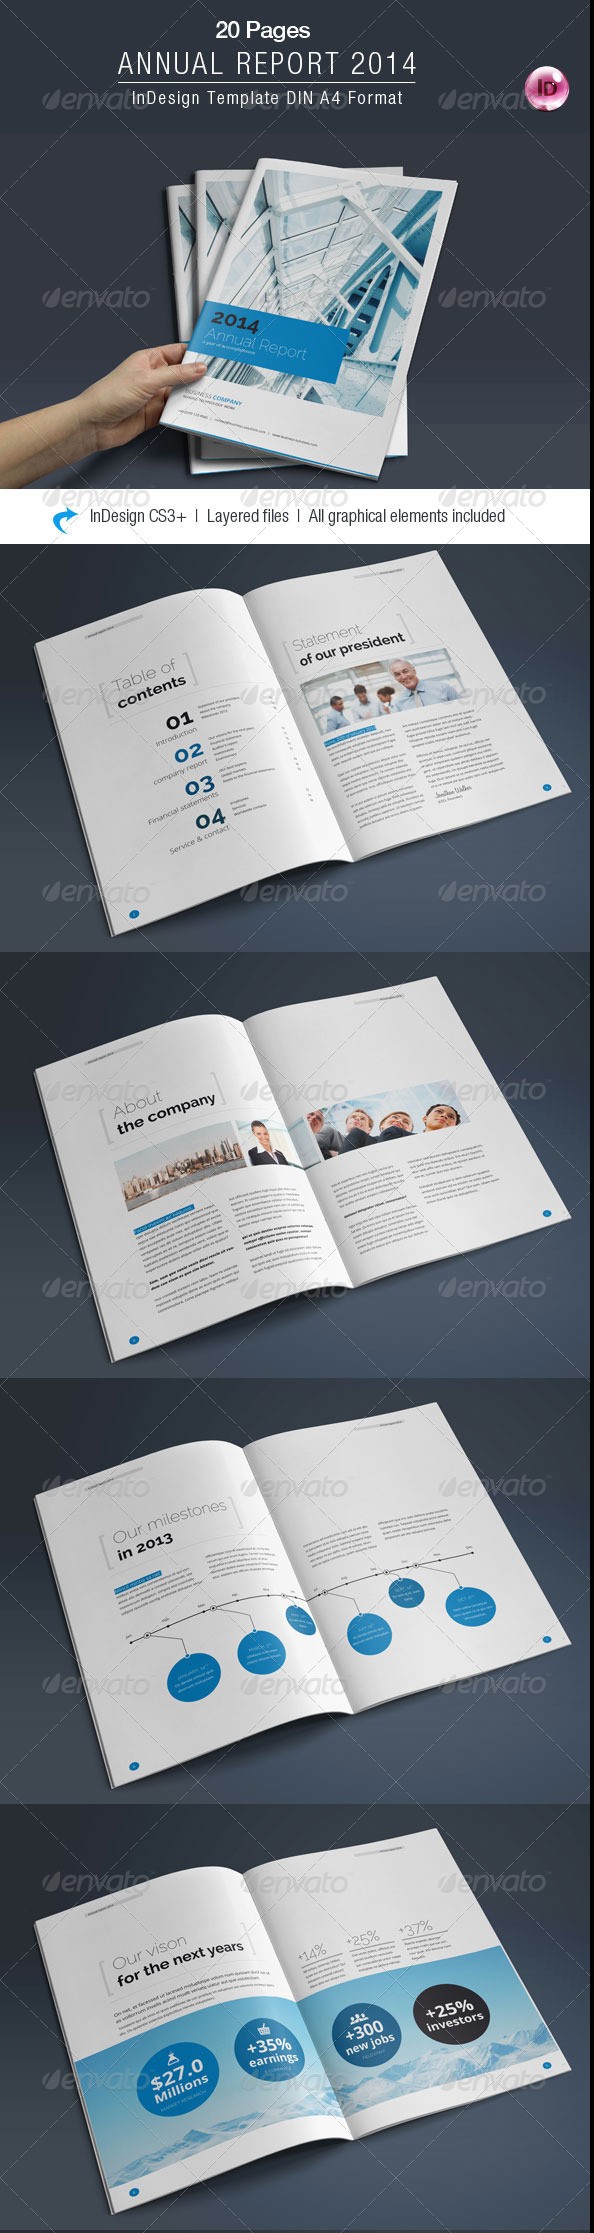 Annual Report 20 Pages